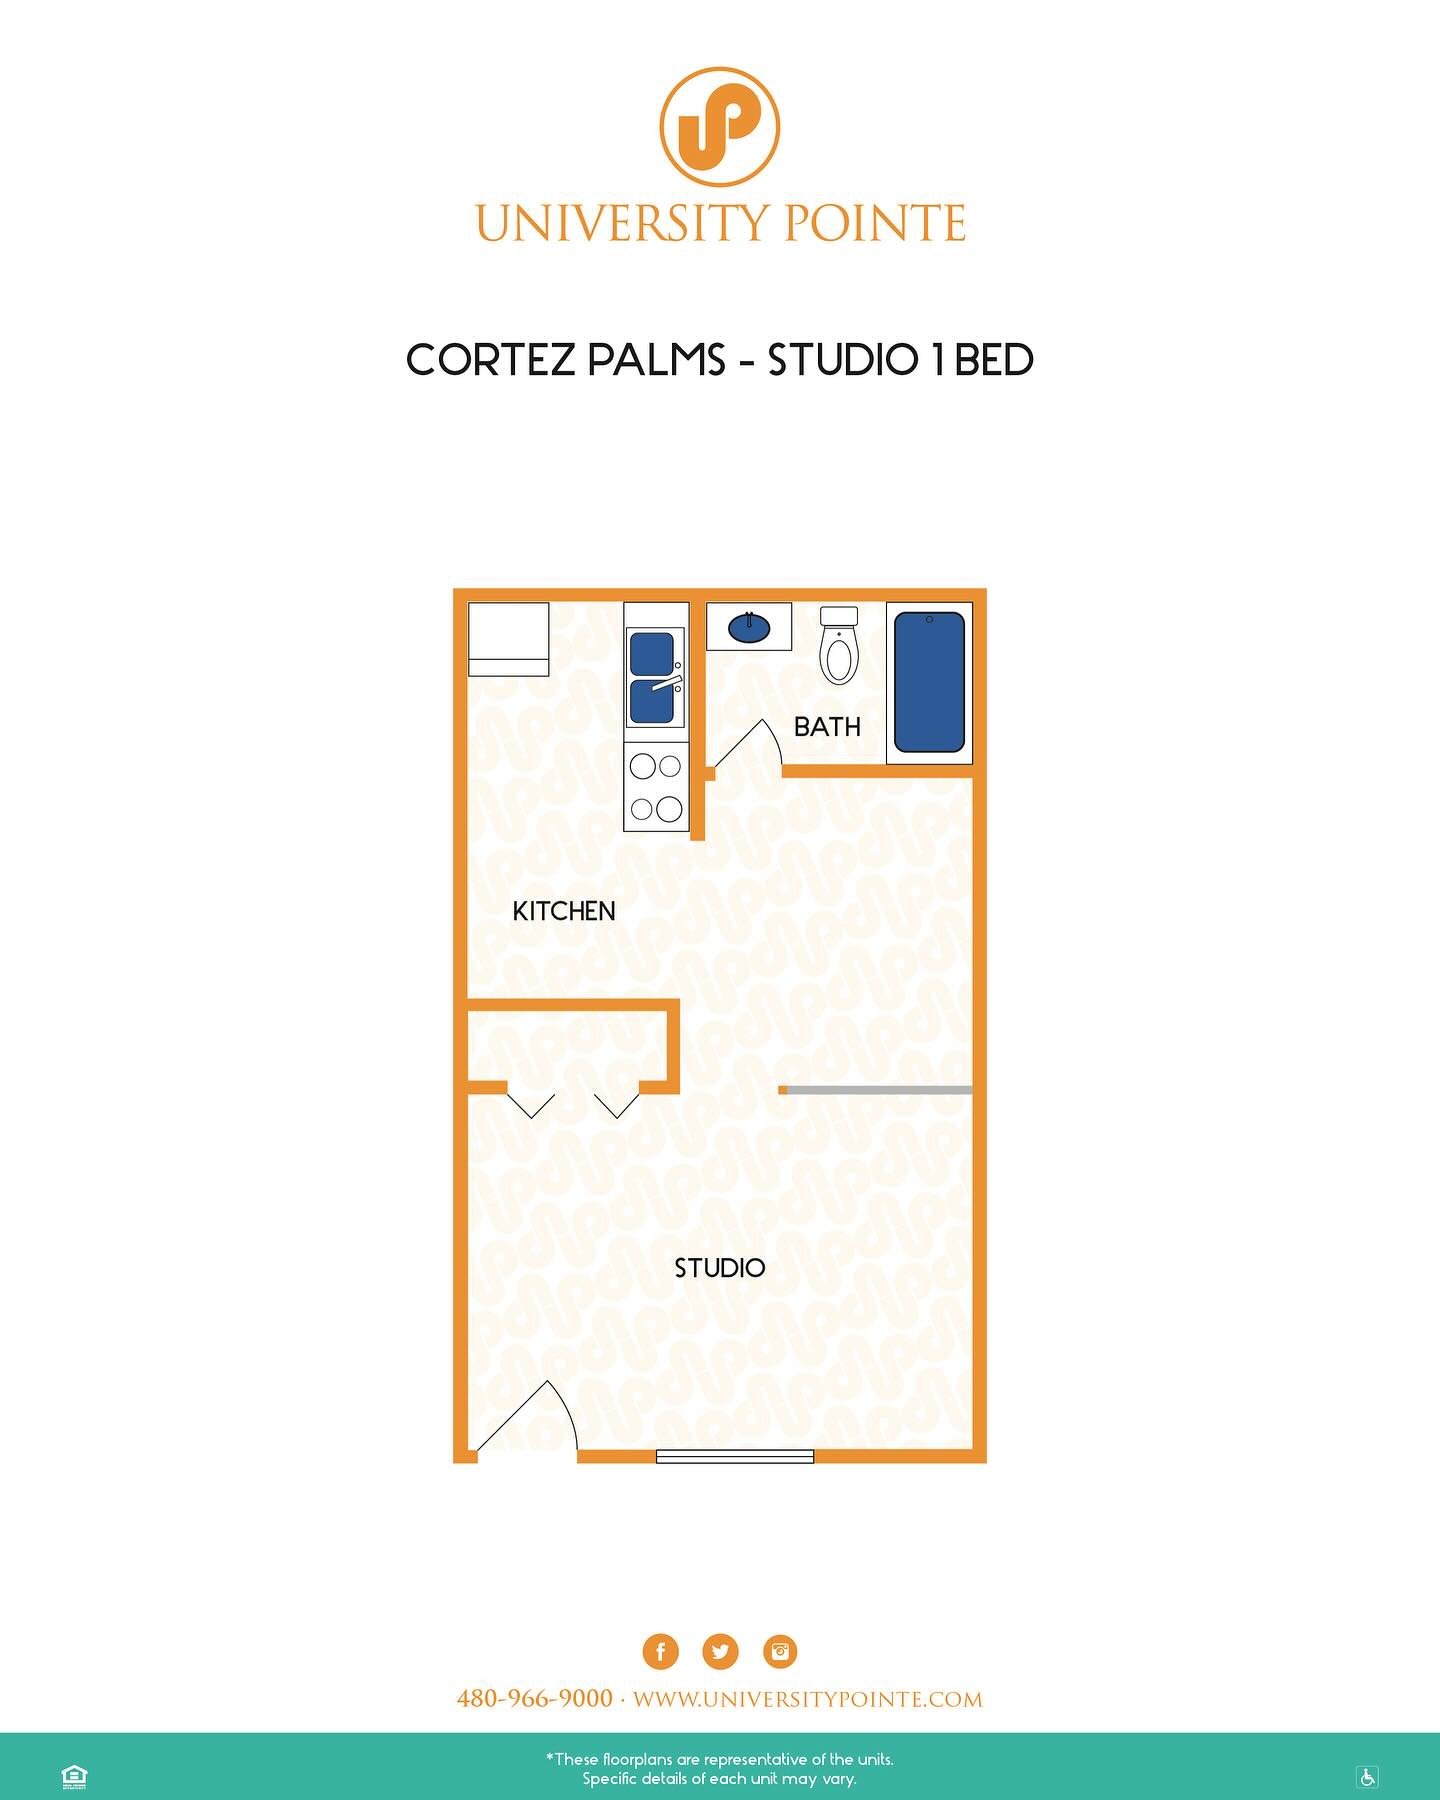 Our Studio floor plans are selling fast! Pre-lease today before they&rsquo;re all gone for Fall!!

Call or email our leasing office for more information! 
480.966.9000 or leasing@universitypointe.com